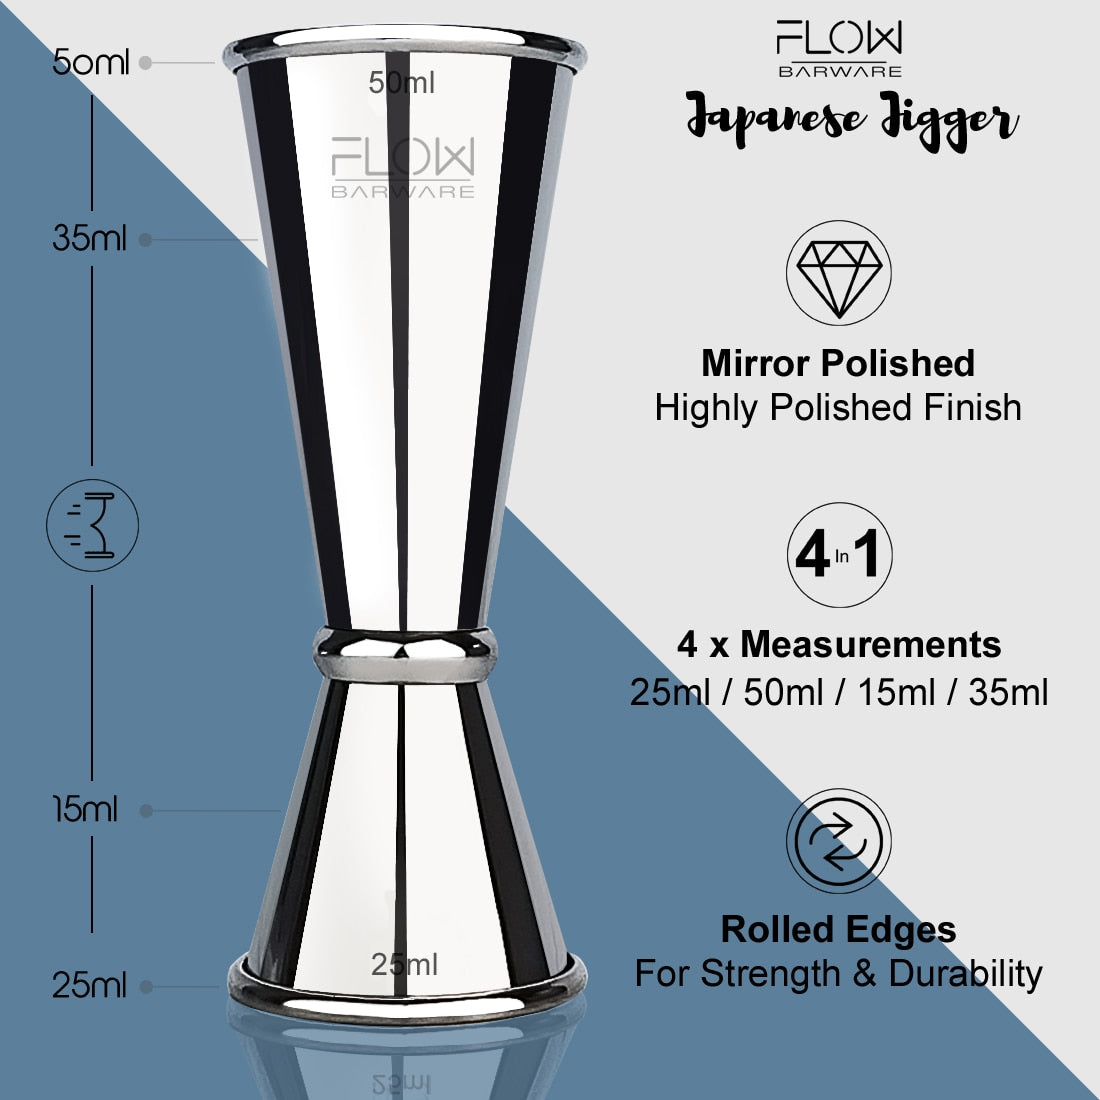 Stainless Spirit Cocktails Measure Cup 2 Sizes Shot Jigger Alcohol